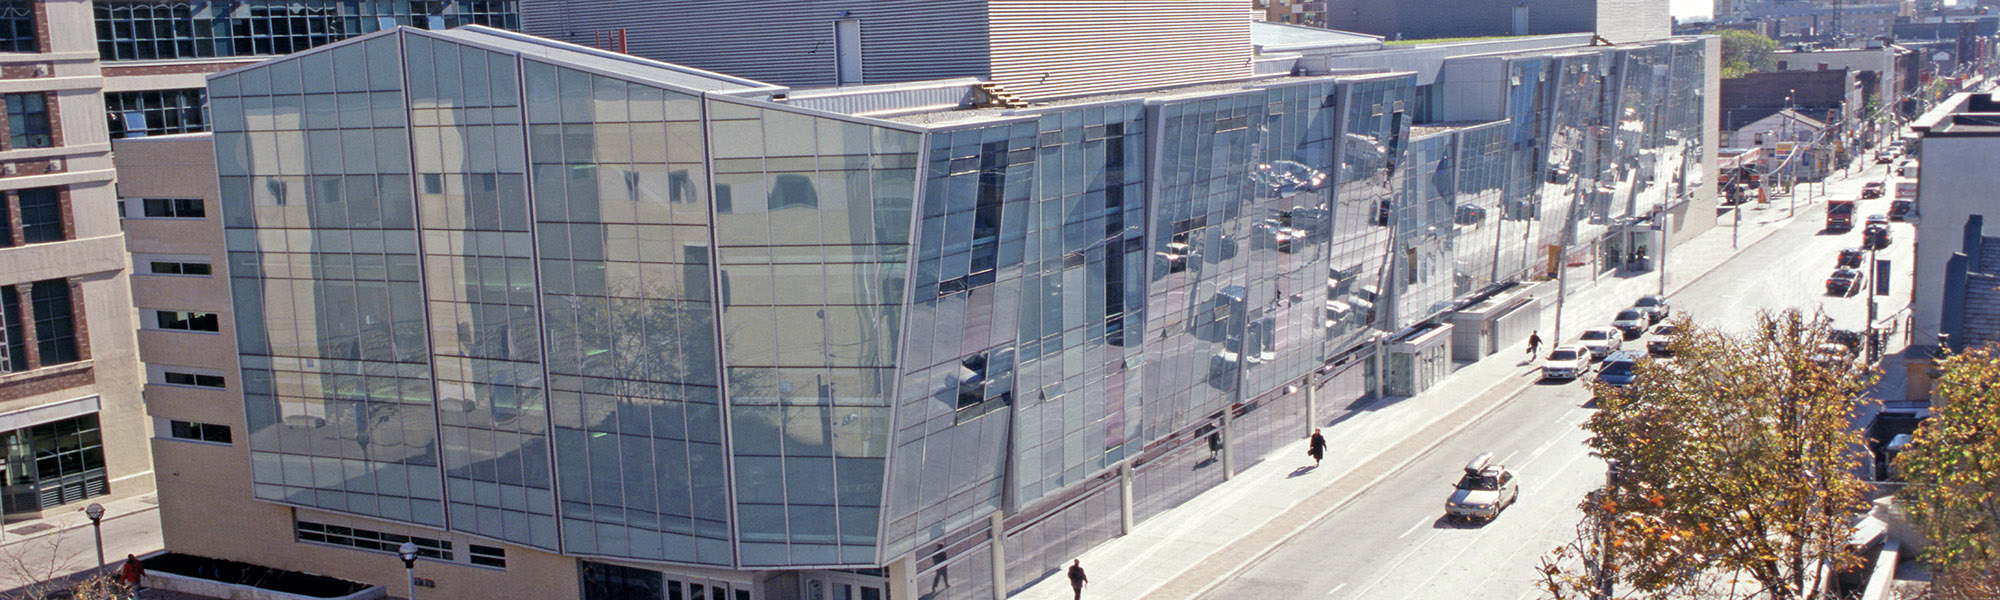 Bird's-eye view of the Faculty of Engineering and Architectural science at Ryerson University